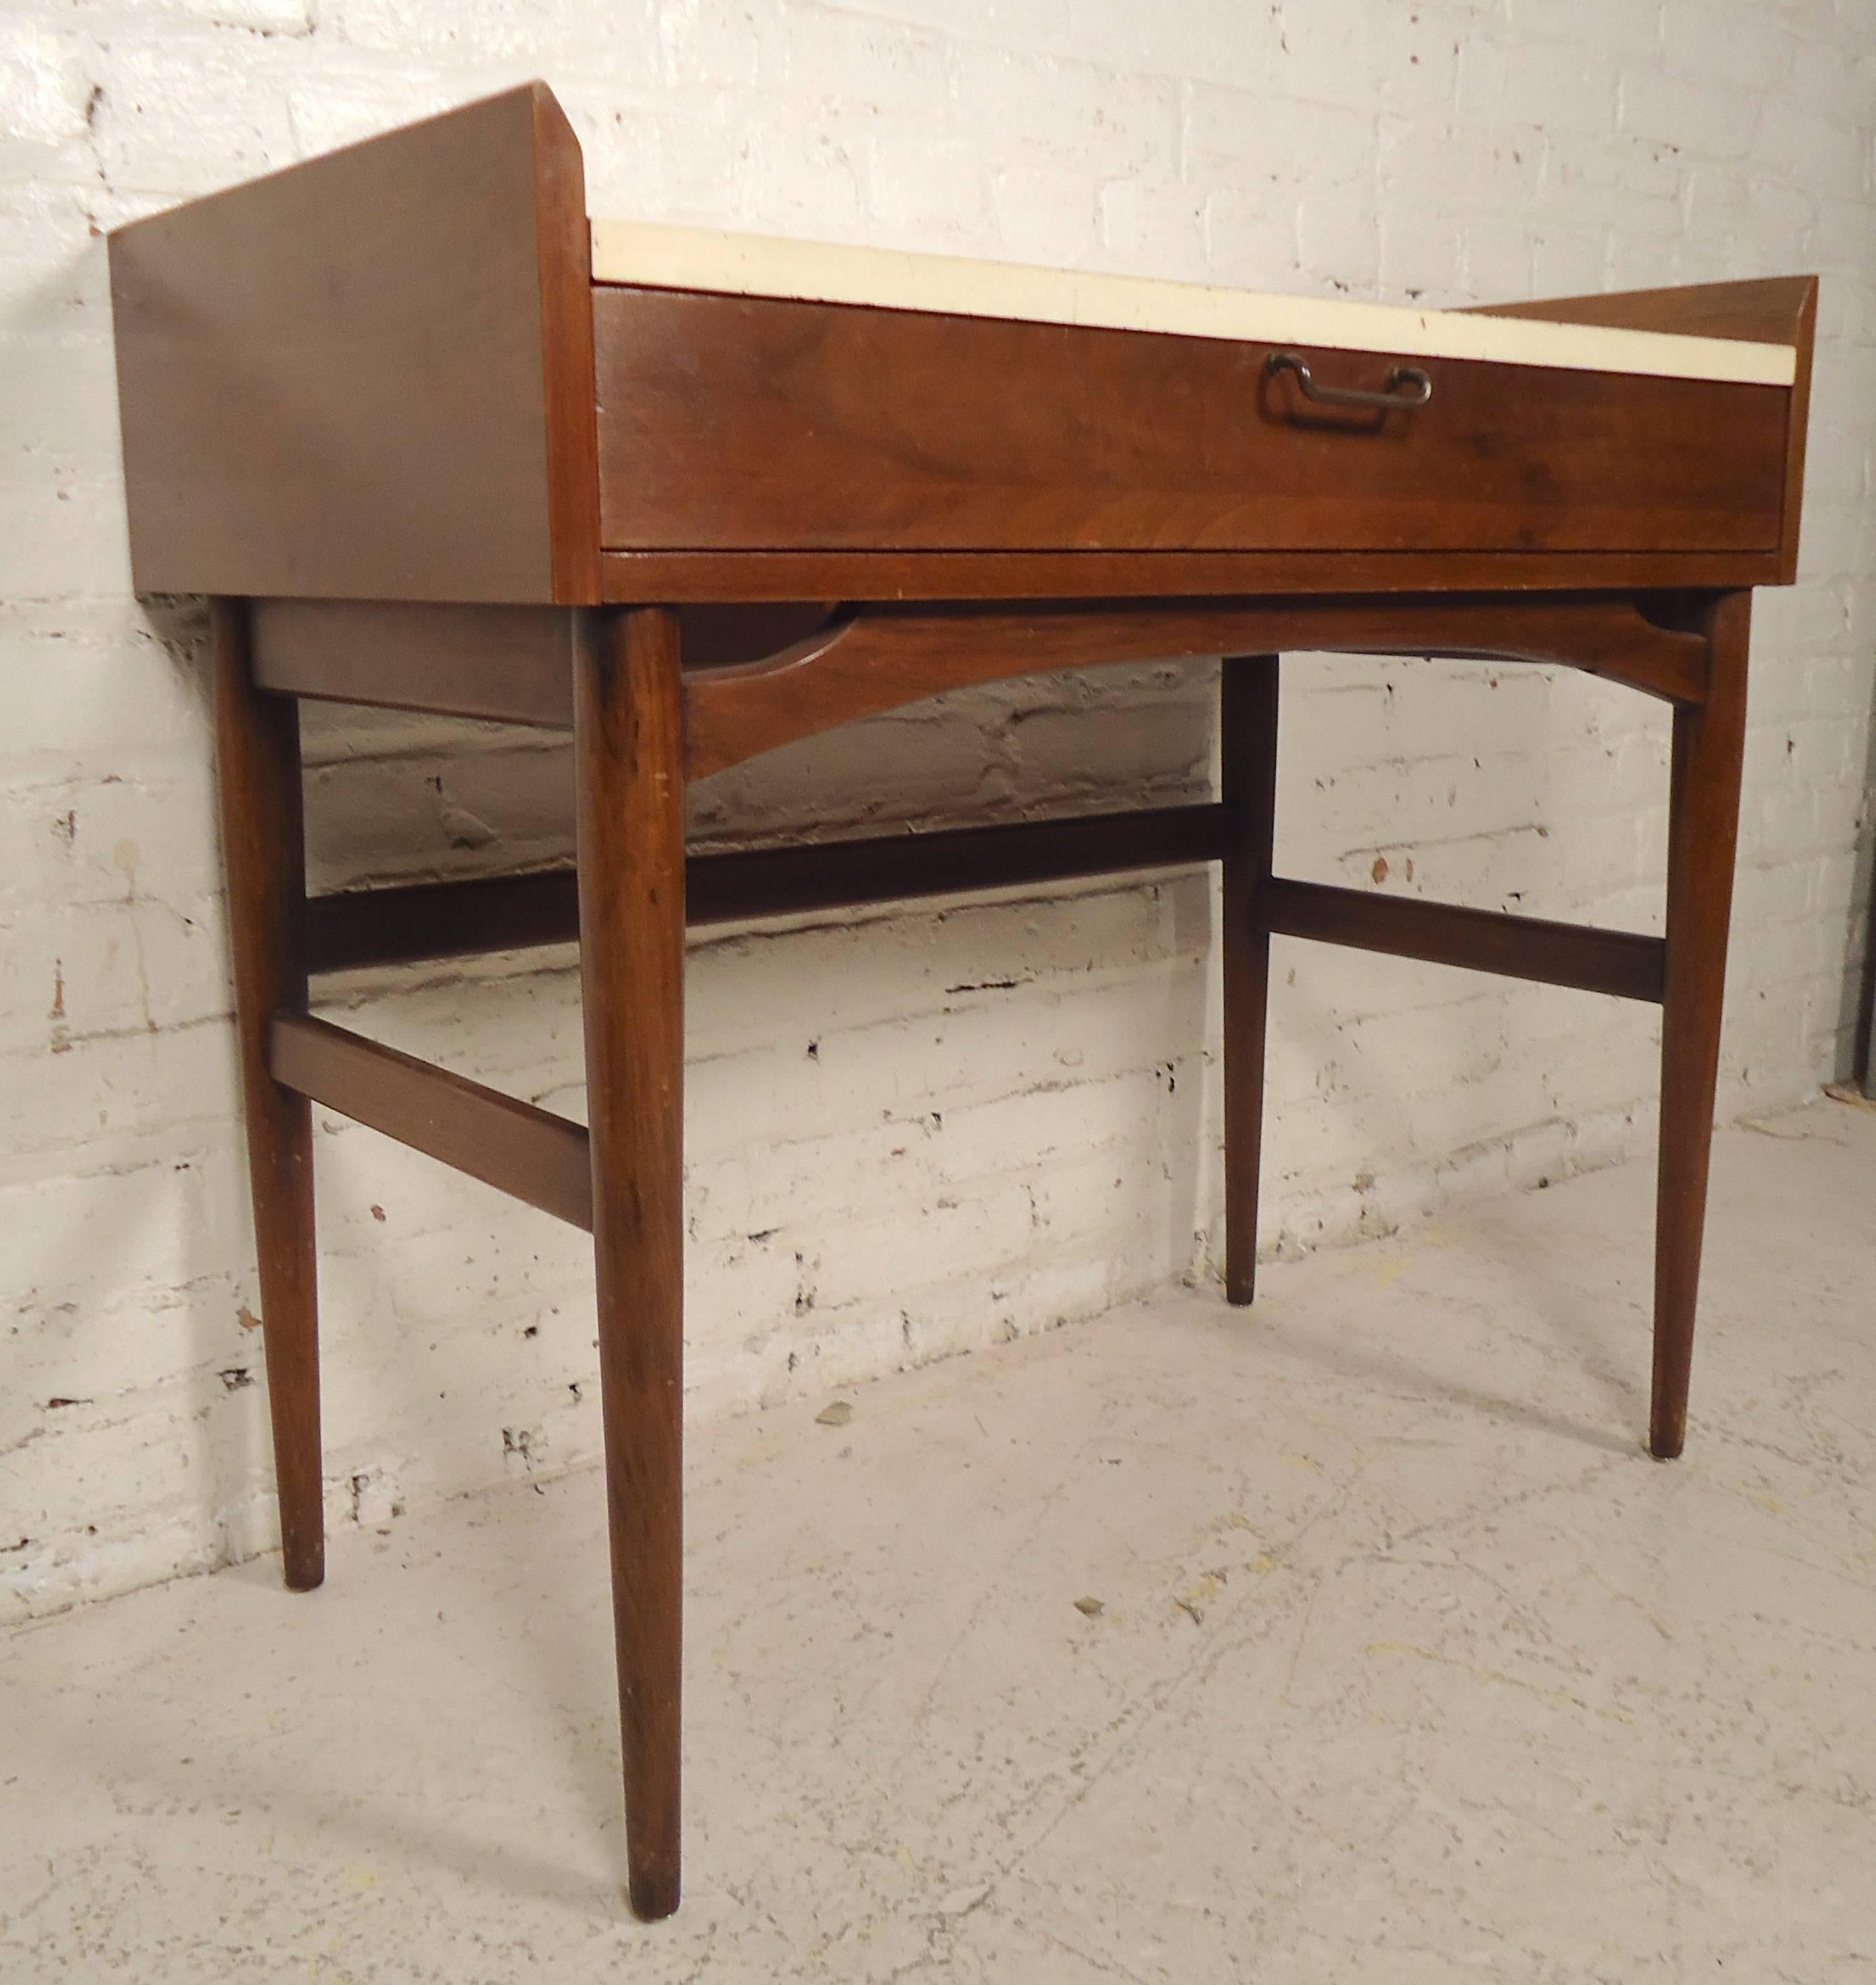 Mid-Century desk by American of Martinsville. Features white top, walnut frame, raised sides and tapered legs. Single drawer. Work well as an attractive entryway table.

(Please confirm item location - NY or NJ - with dealer).
 